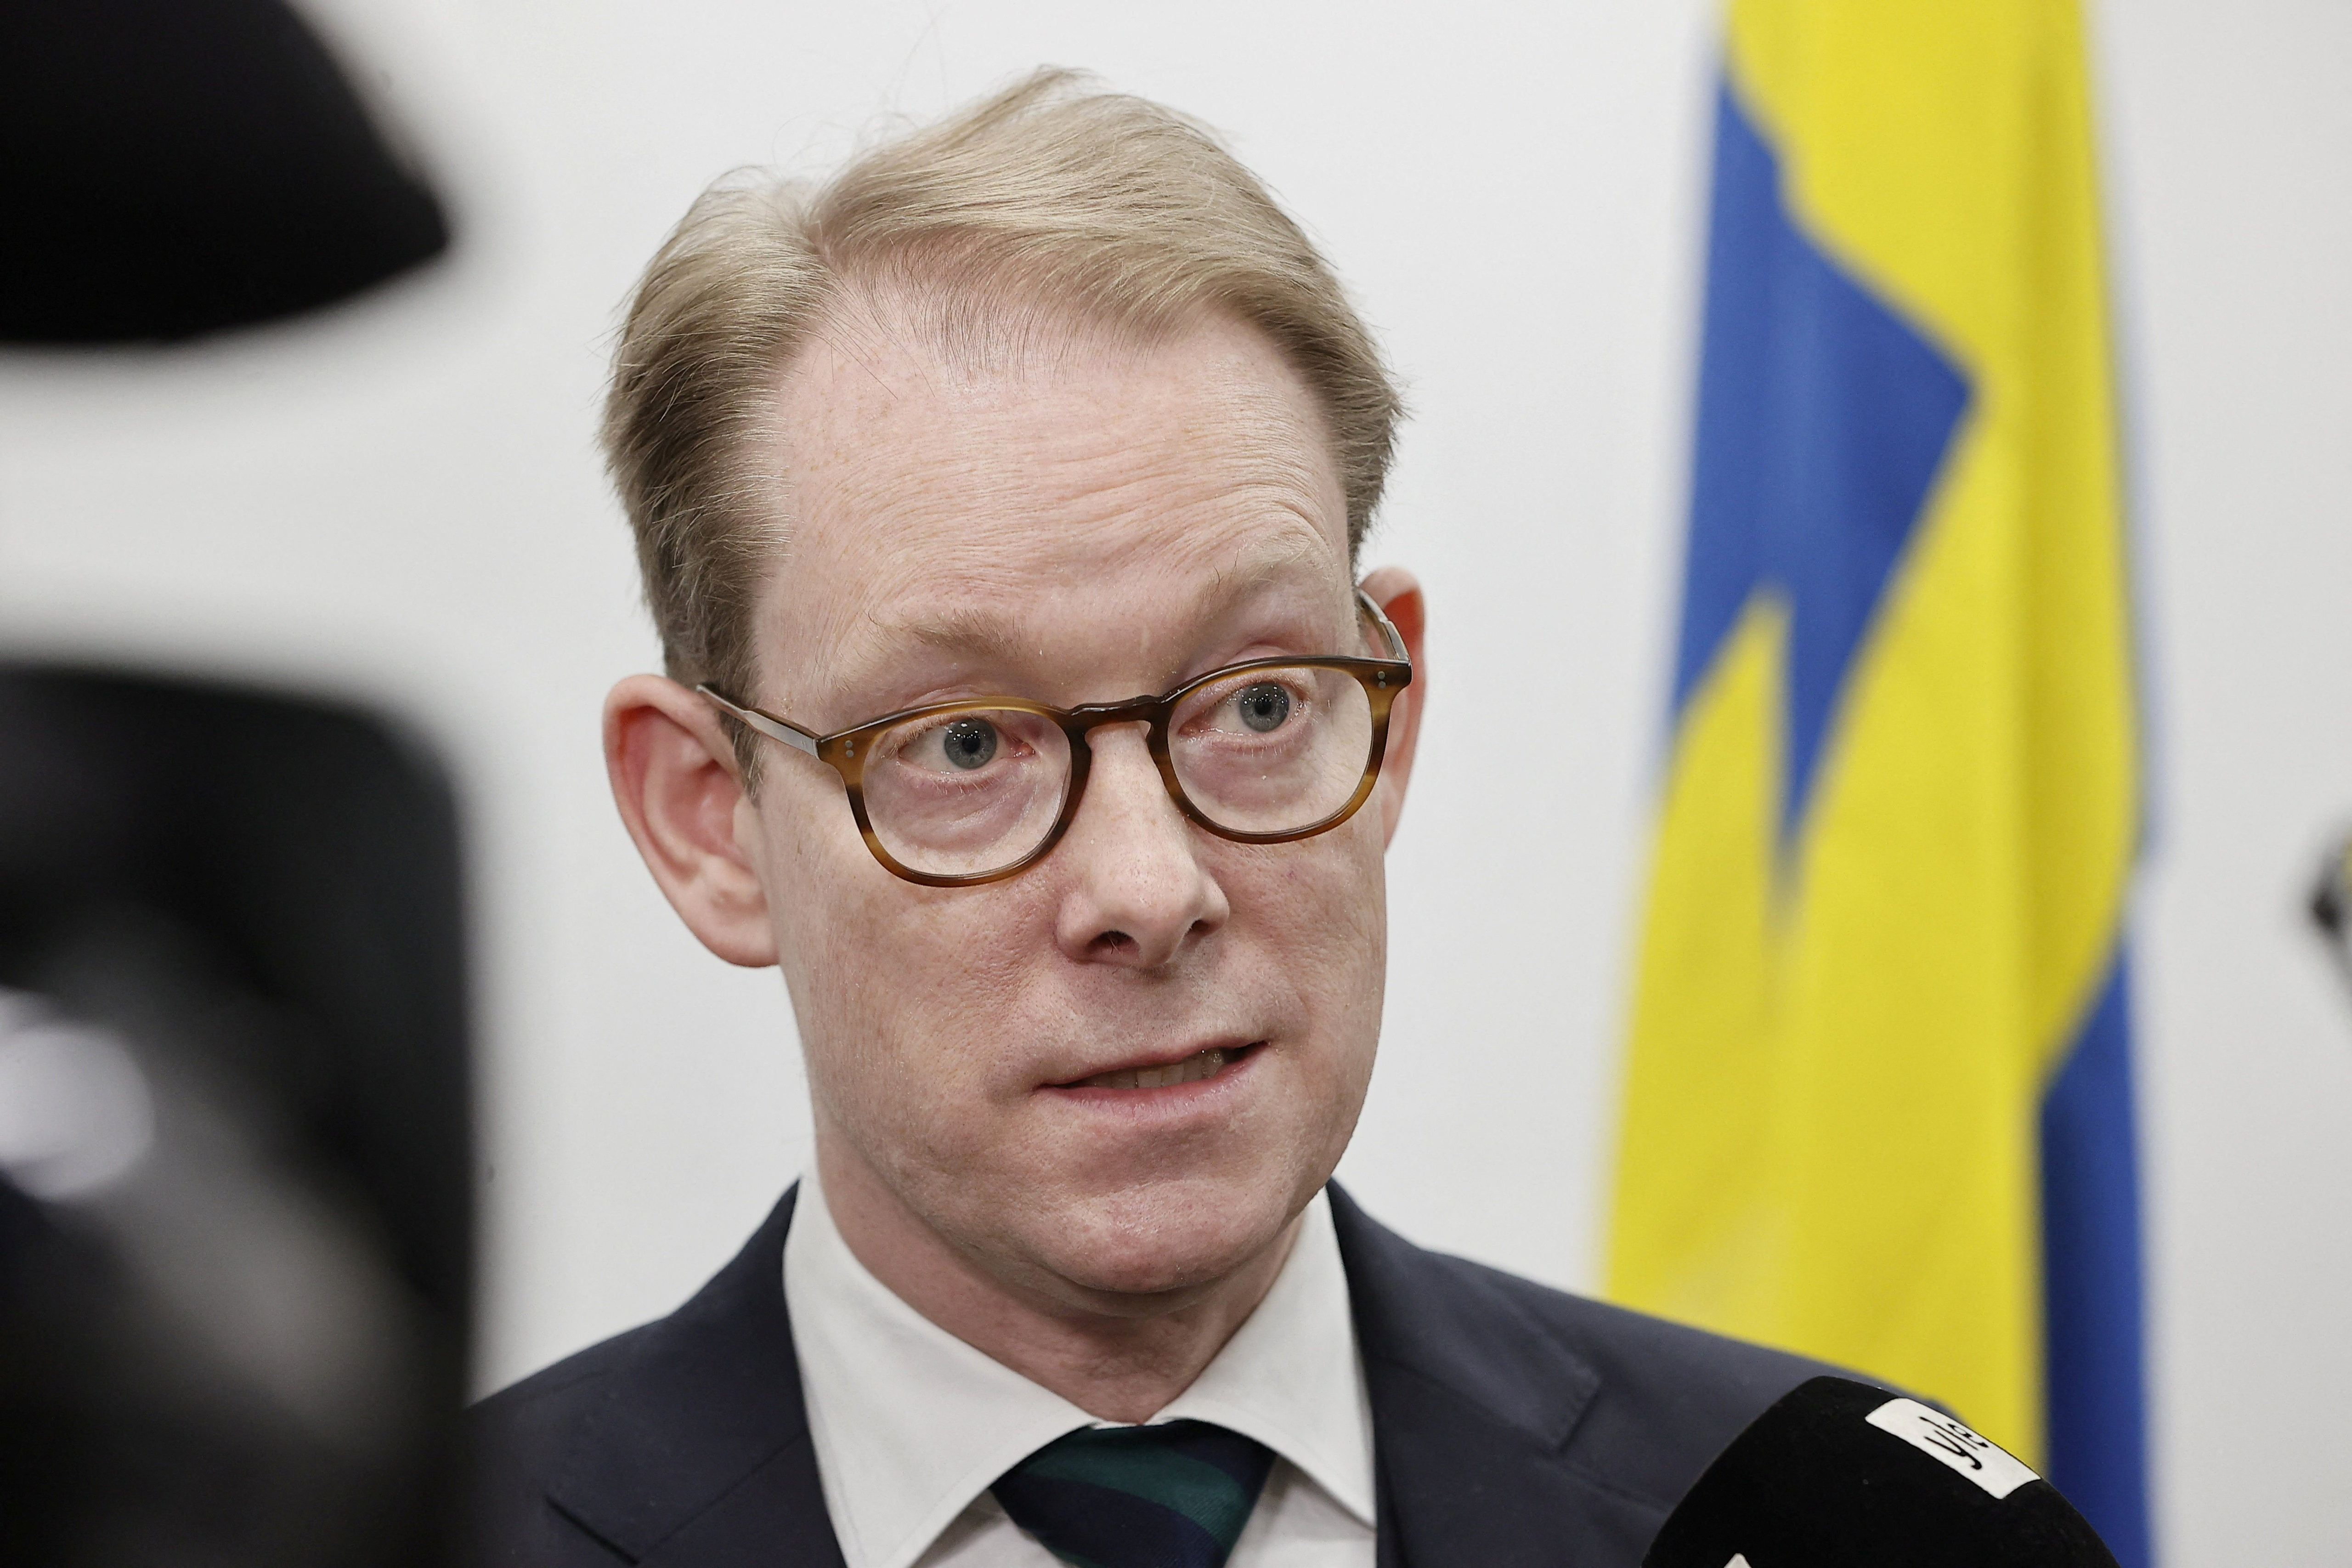 Finland and Sweden and European cooperation in a new era